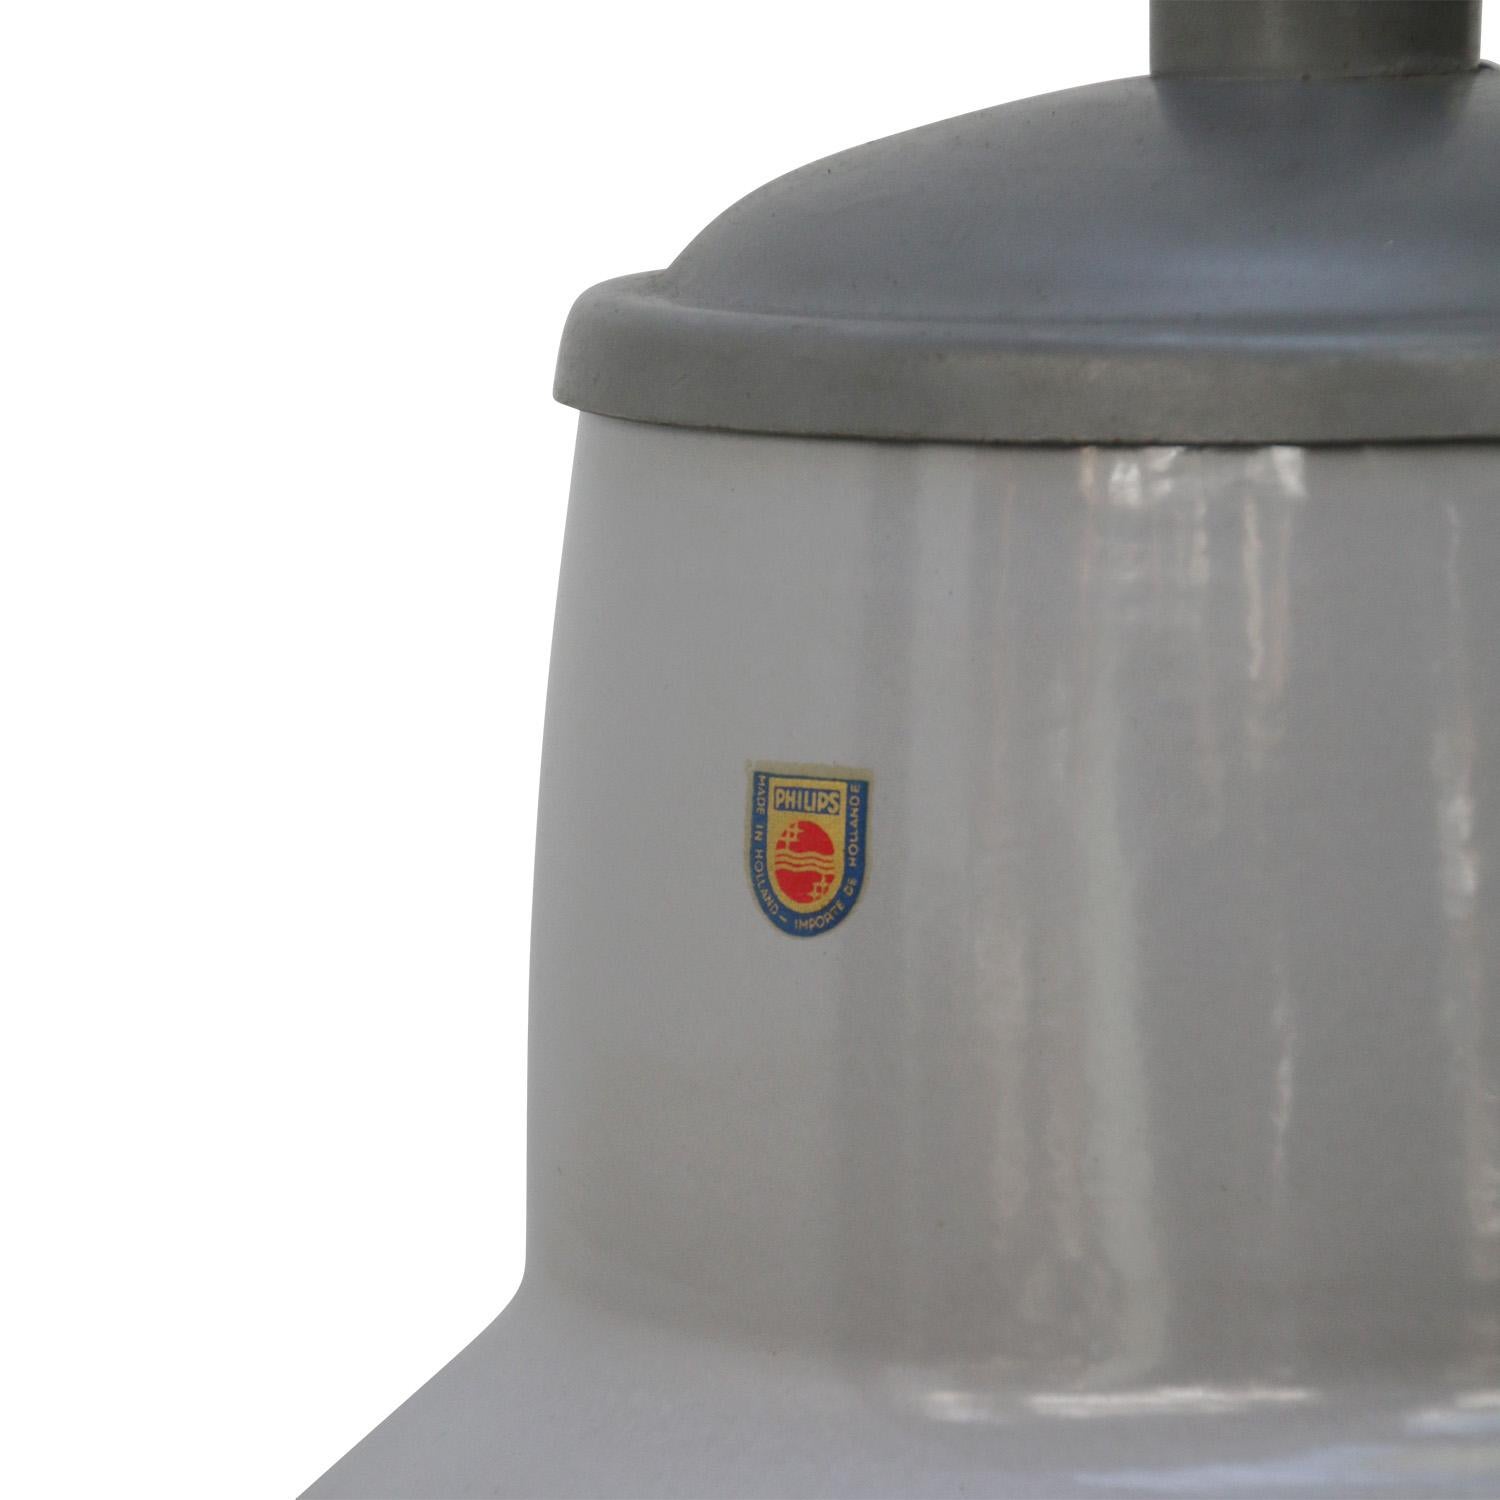 Dutch grey industrial factory light by Philips
Thick quality enamel. Metal top.
Used in warehouses and factories.

Double bulb holder: 2x E27/E26

Weight: 4.00 kg / 8.8 lb

Priced per individual item. All lamps have been made suitable by